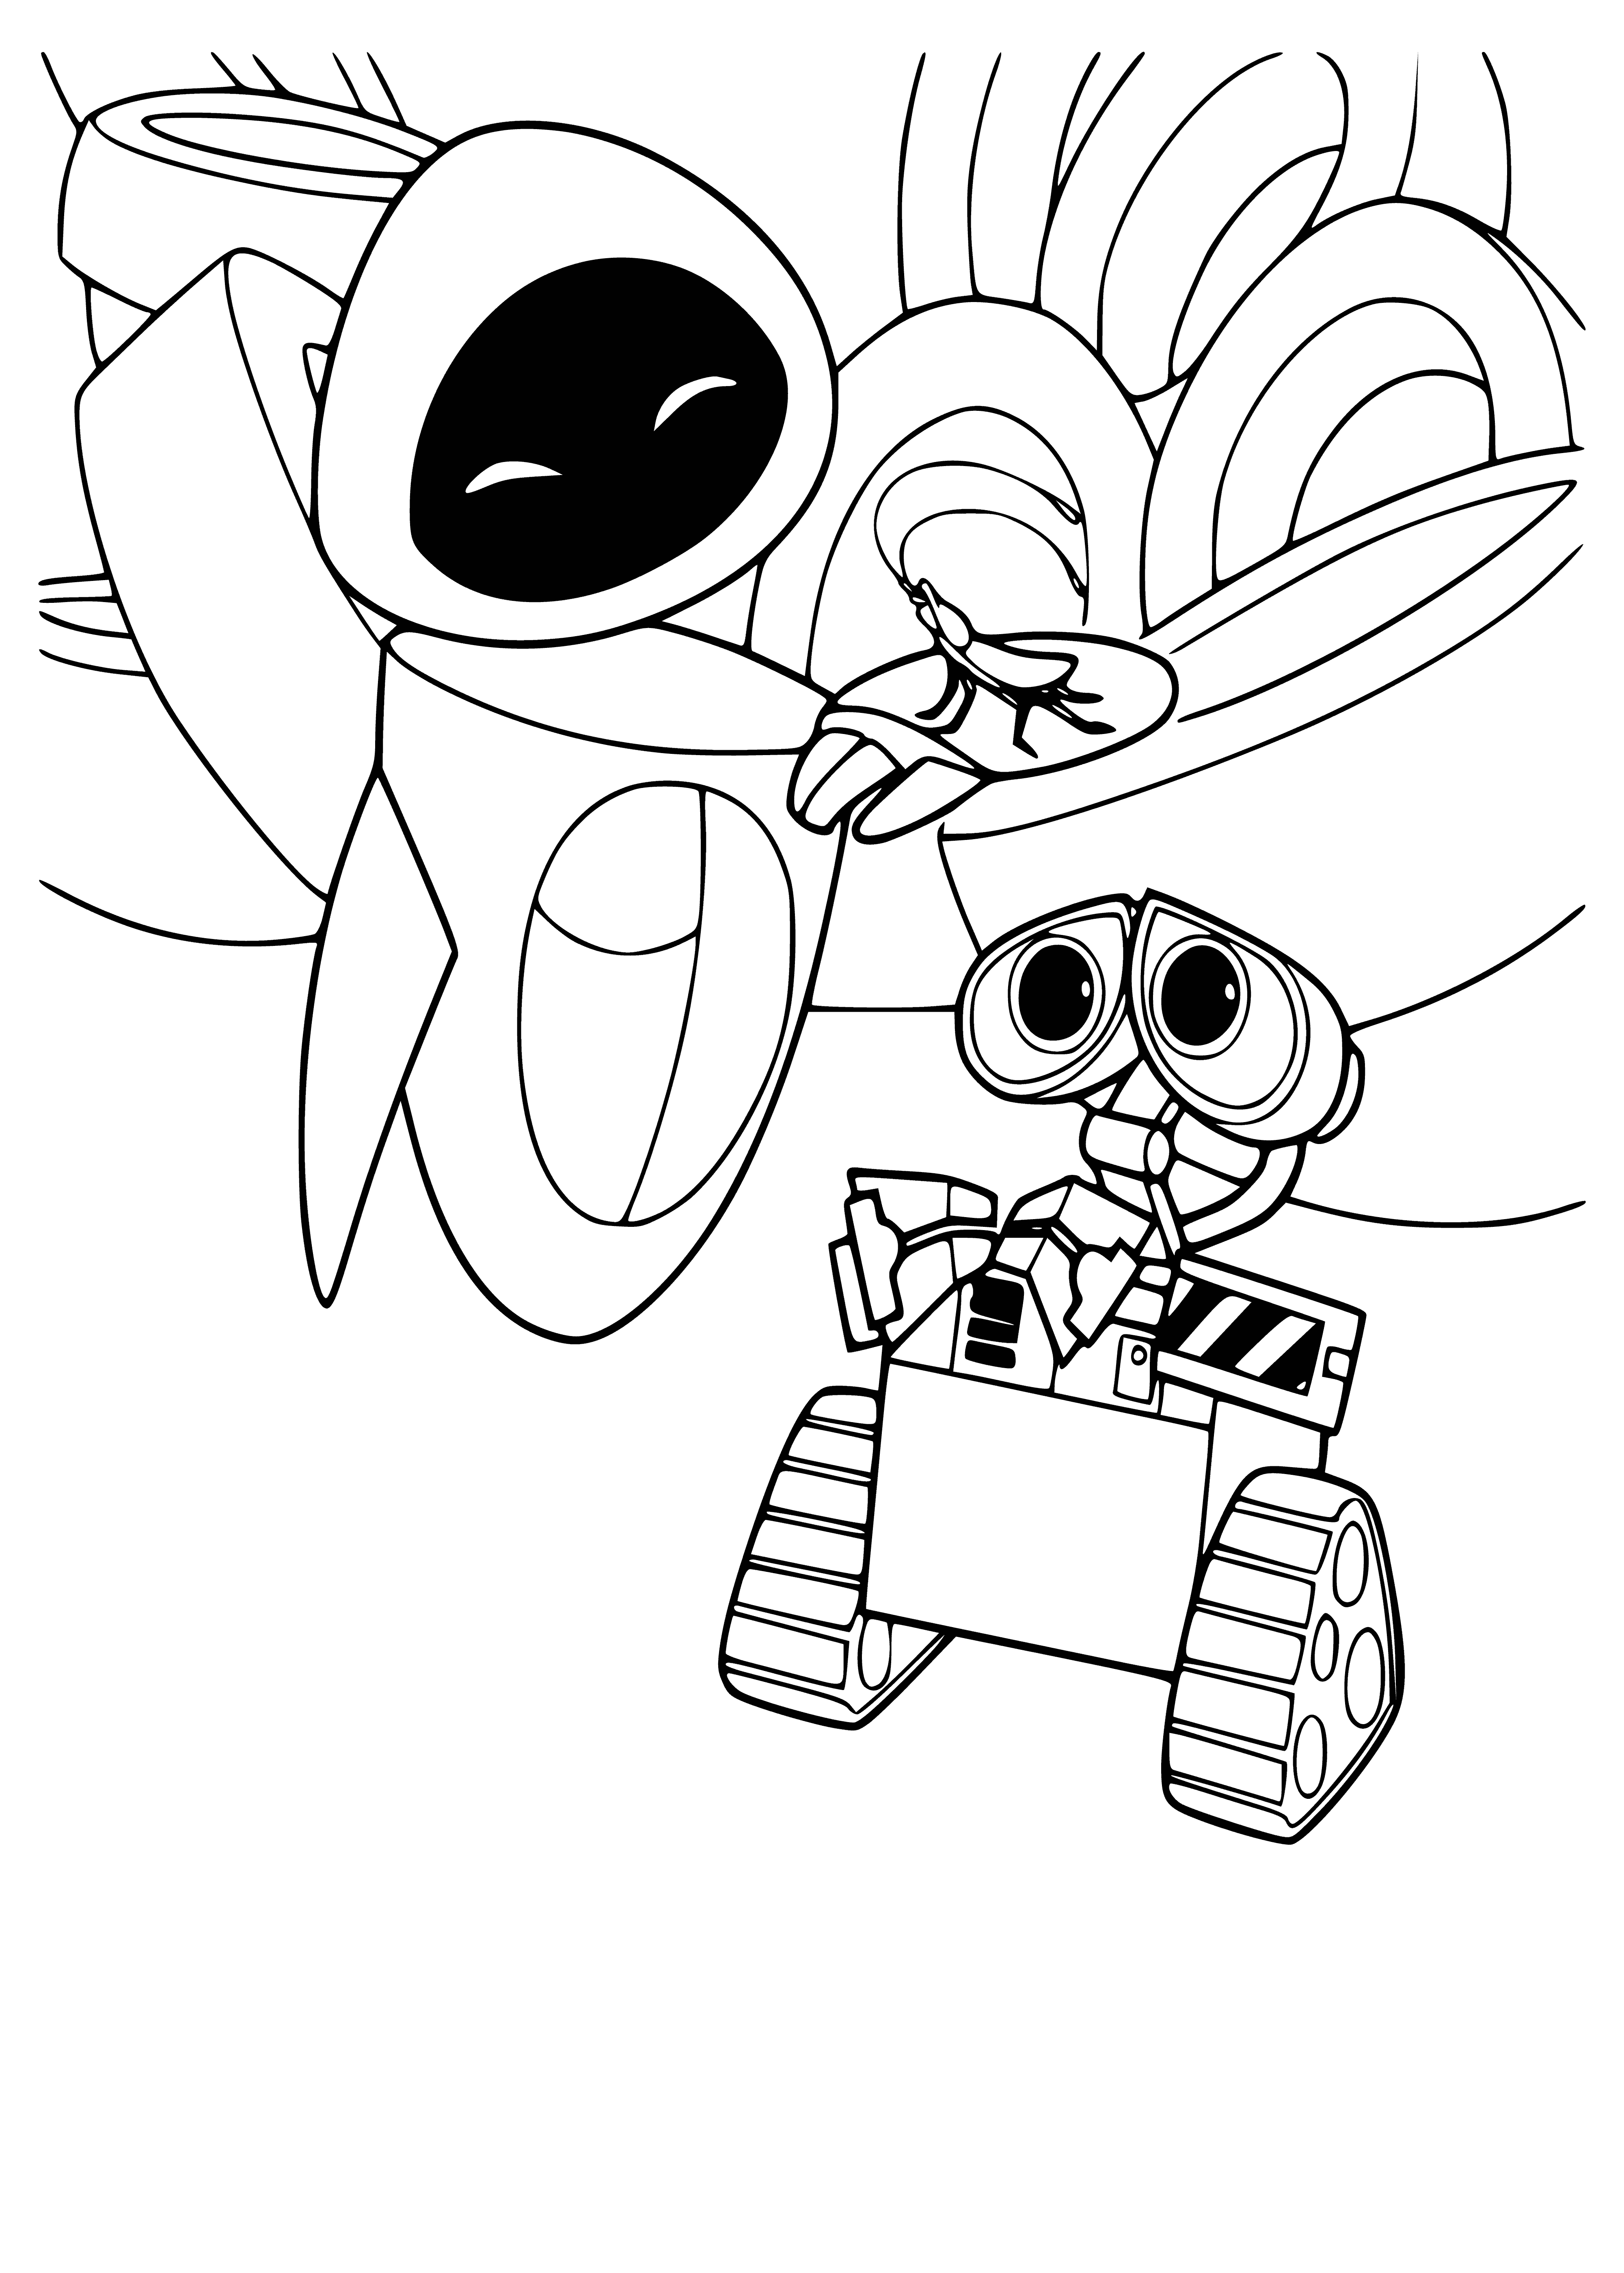 coloring page: Large metal robot holds oval robot in arms. Both have large eyes, grime and the larger has a box on back, spitting out fire. #Robots